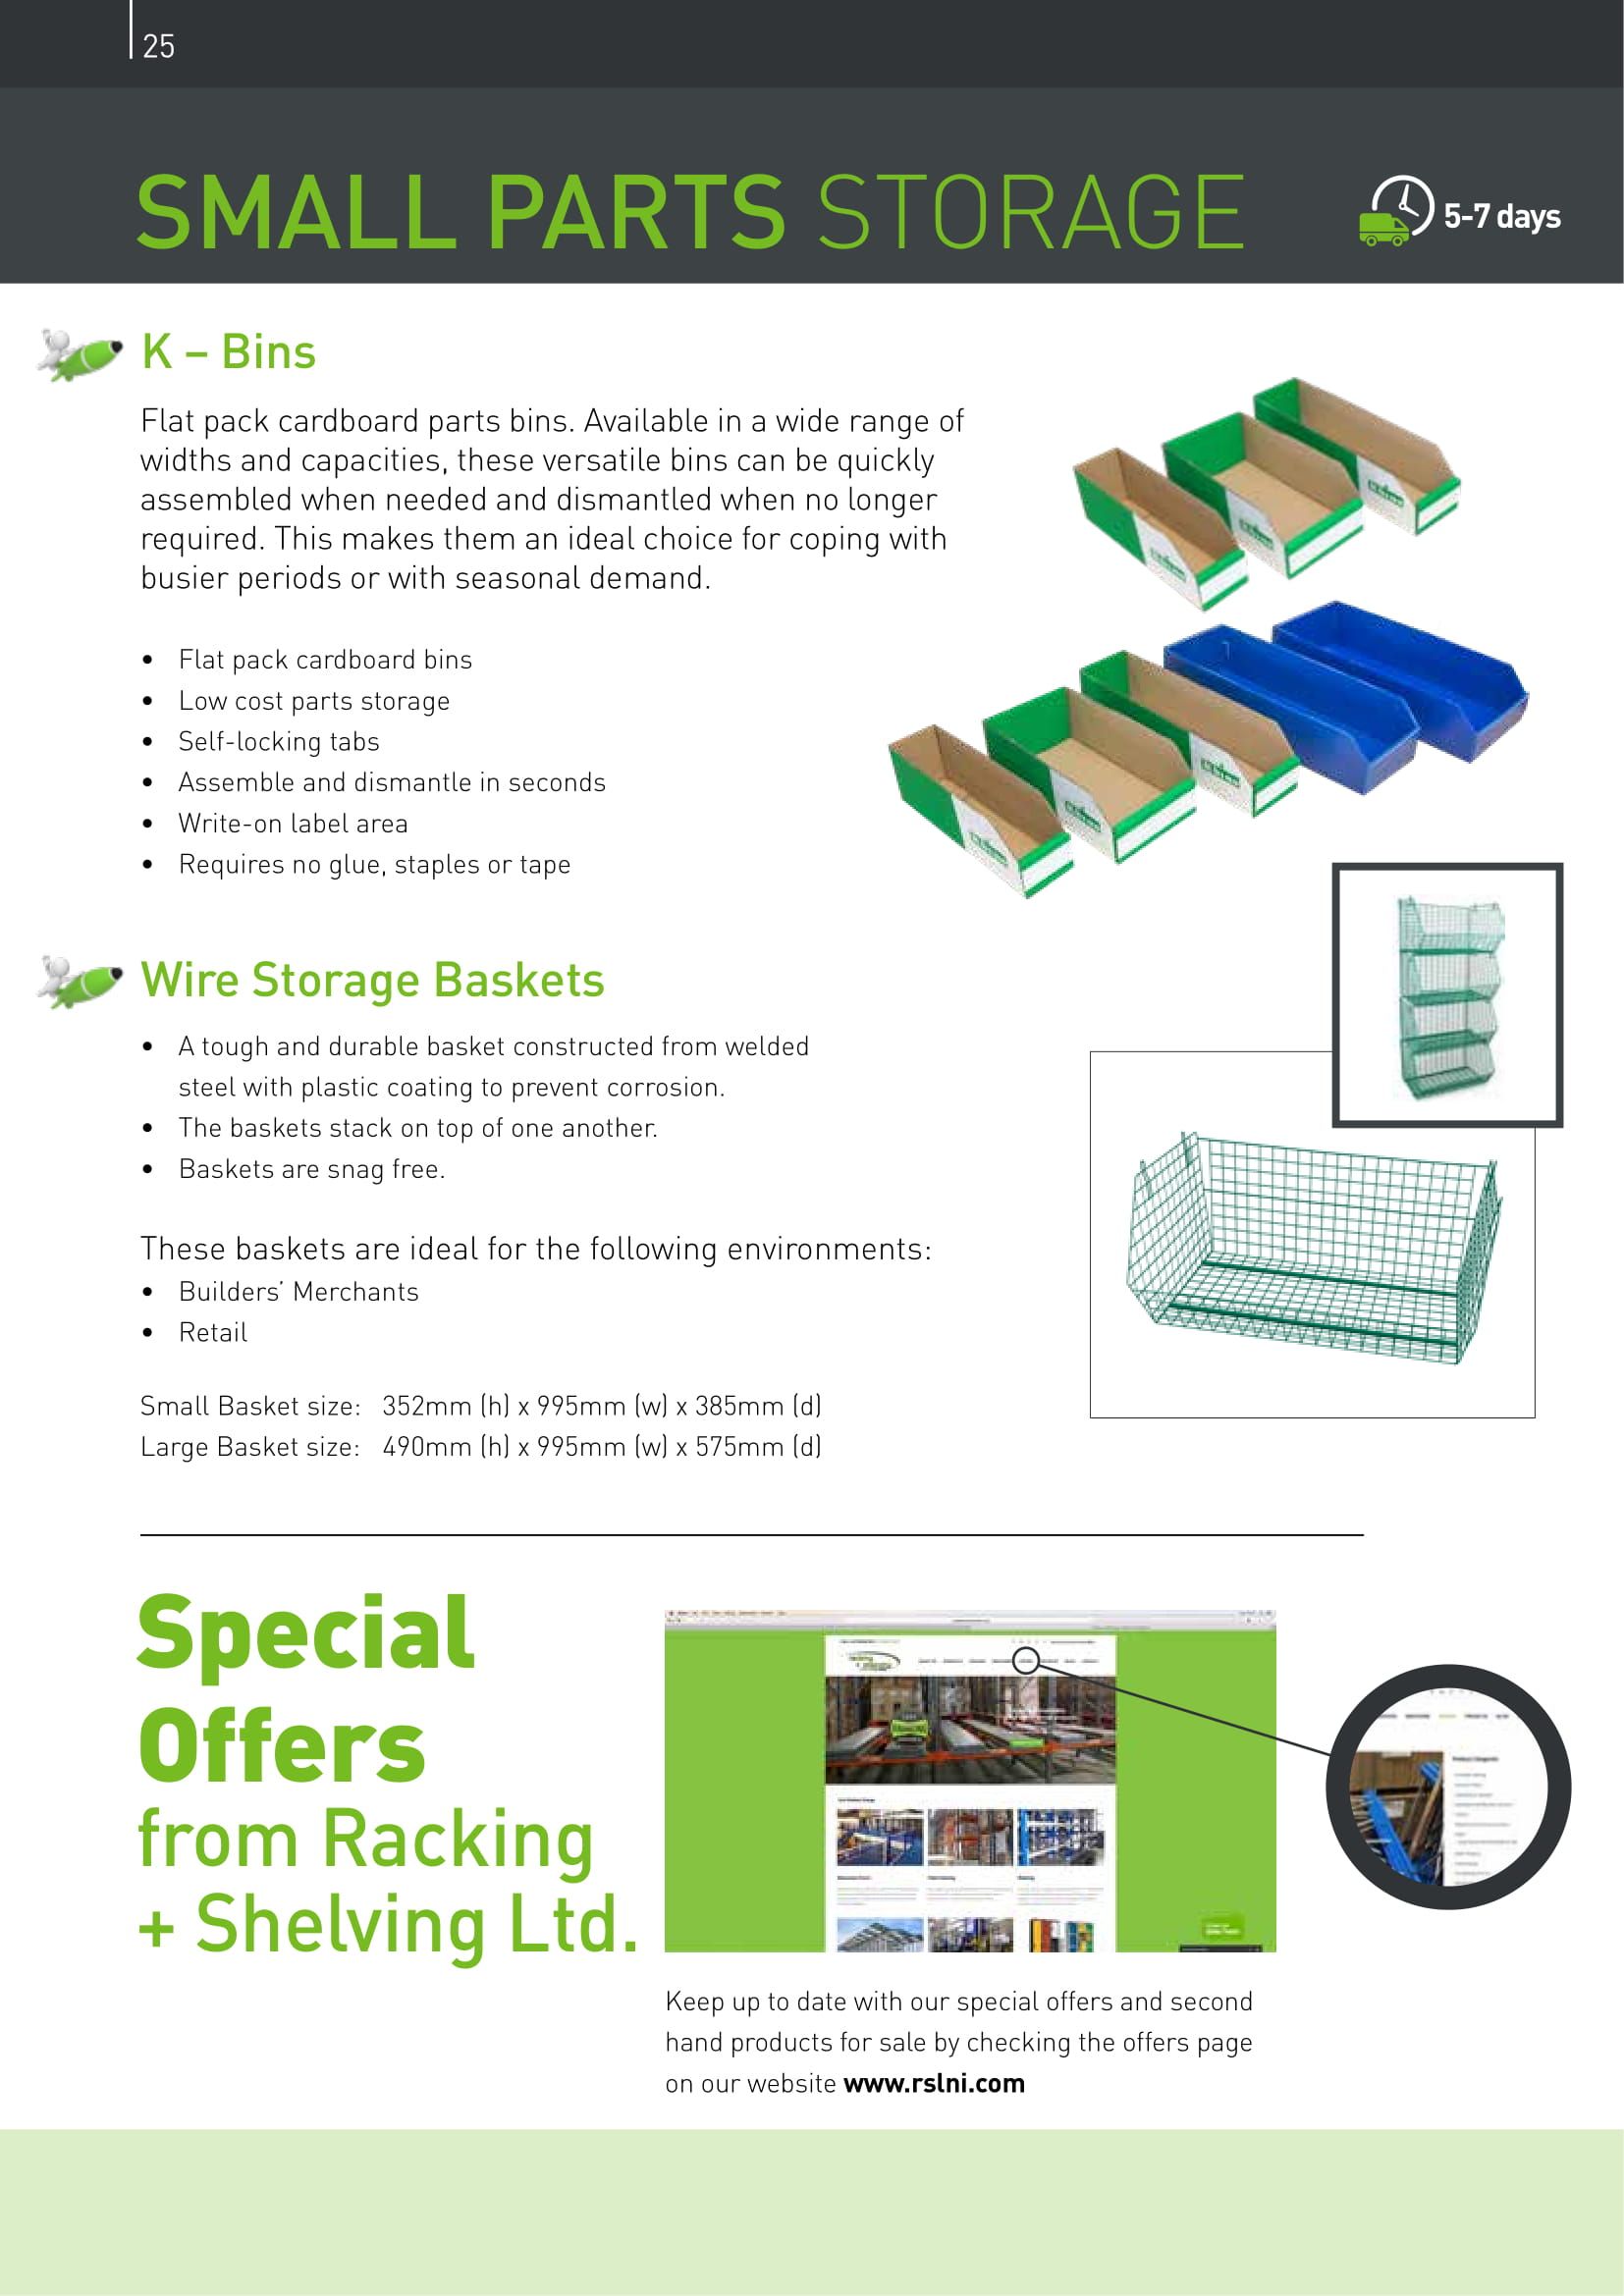 Small parts storage brochure page featuring K-bins & baskets